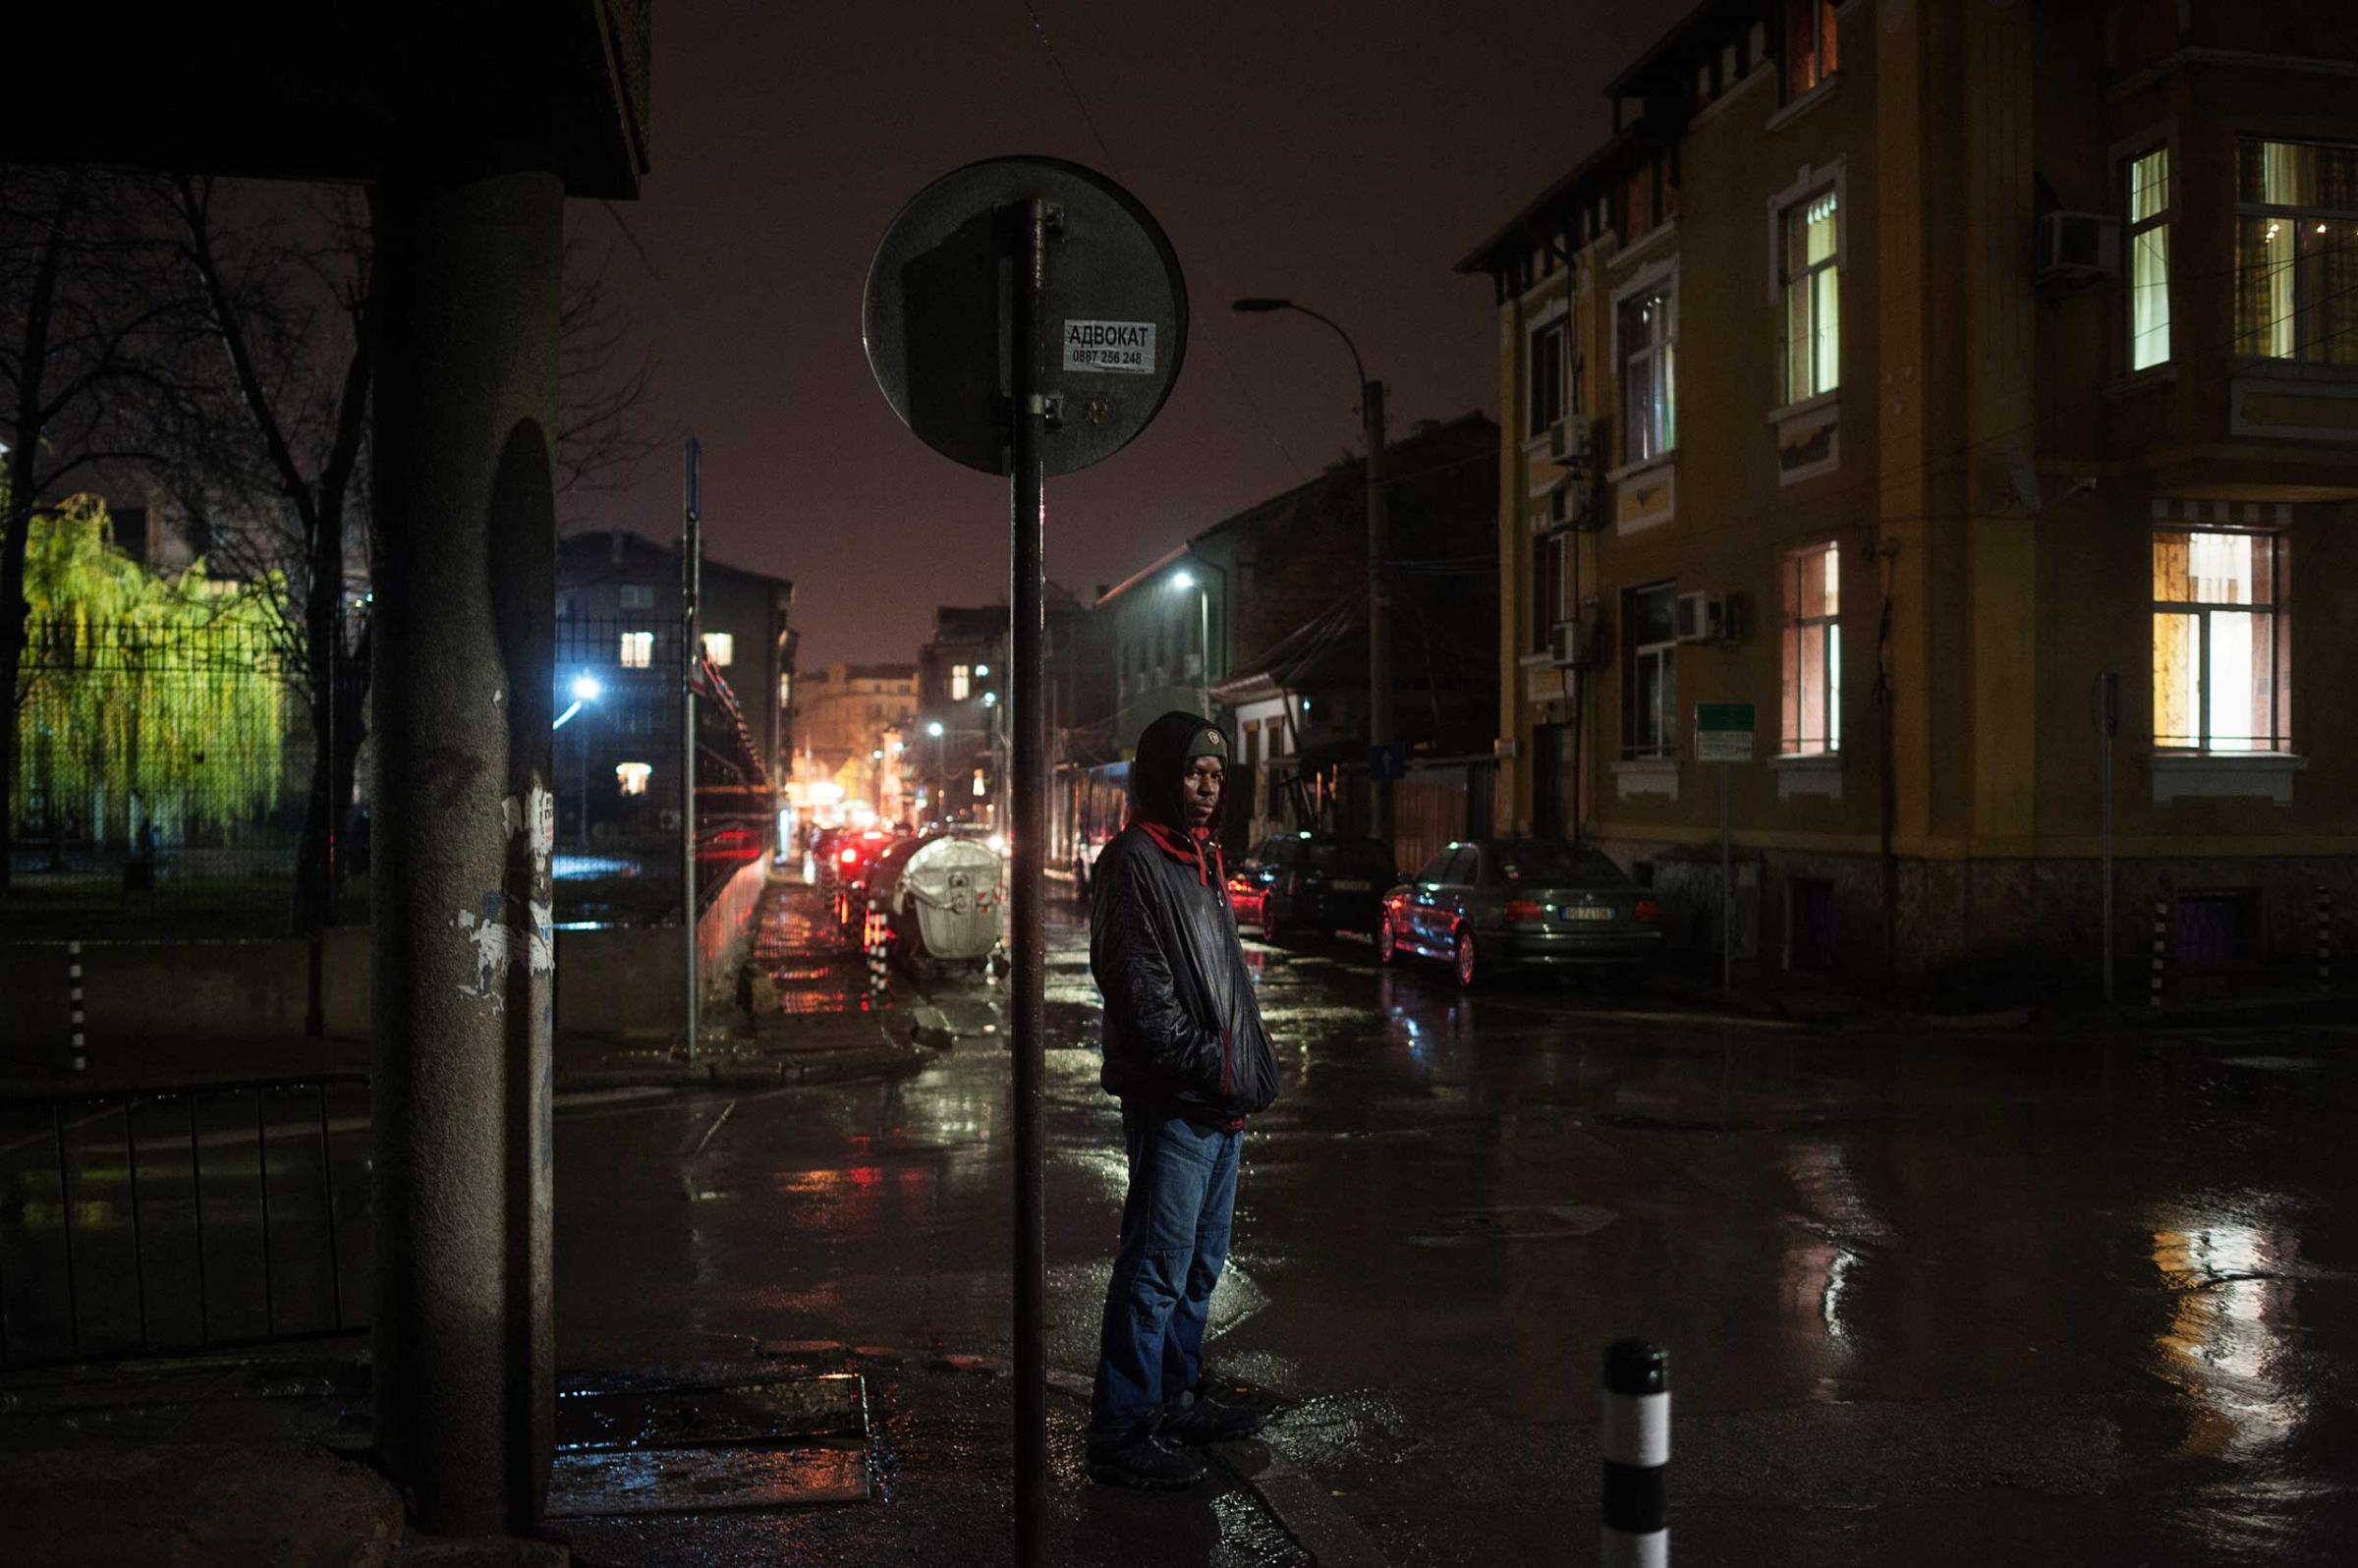 Mansour, an immigrant from Mali waits a friend in downtown Sofia, Sofia, Bulgaria on Dec. 7, 2014. He is in a shelter in south-western part of the city.